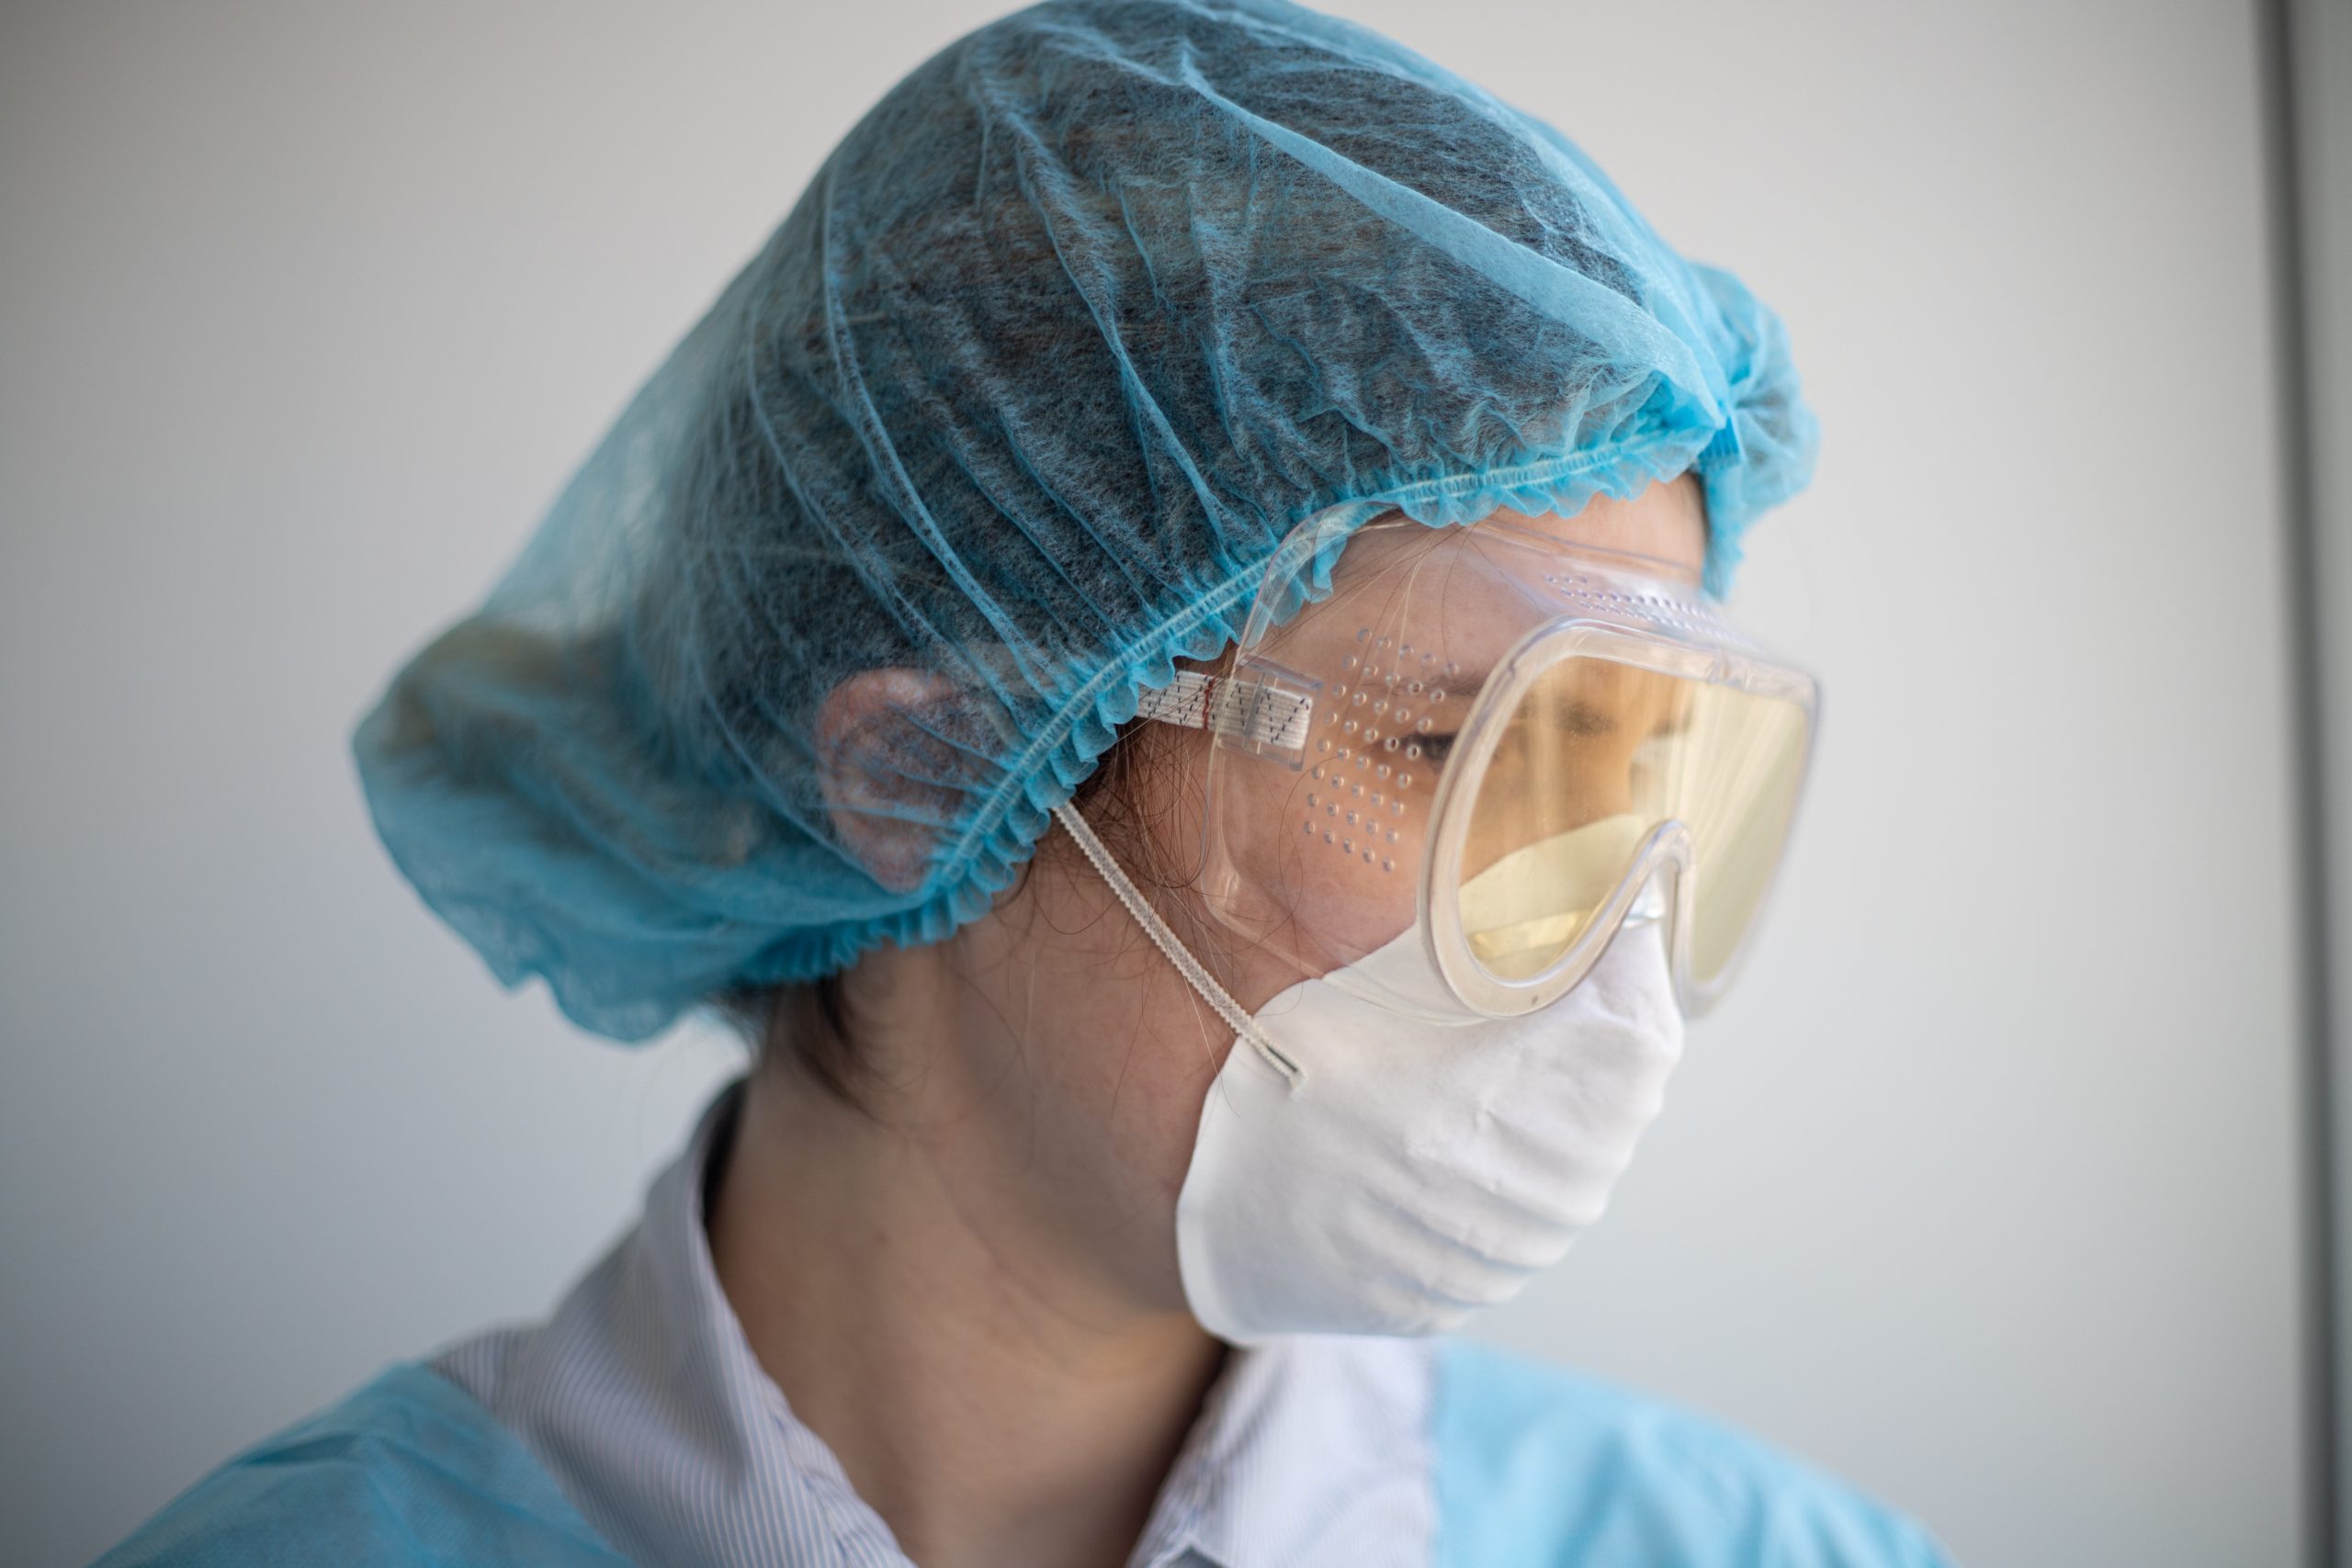 Saskatchewn Health Authority: Putting on (Donning) PPE